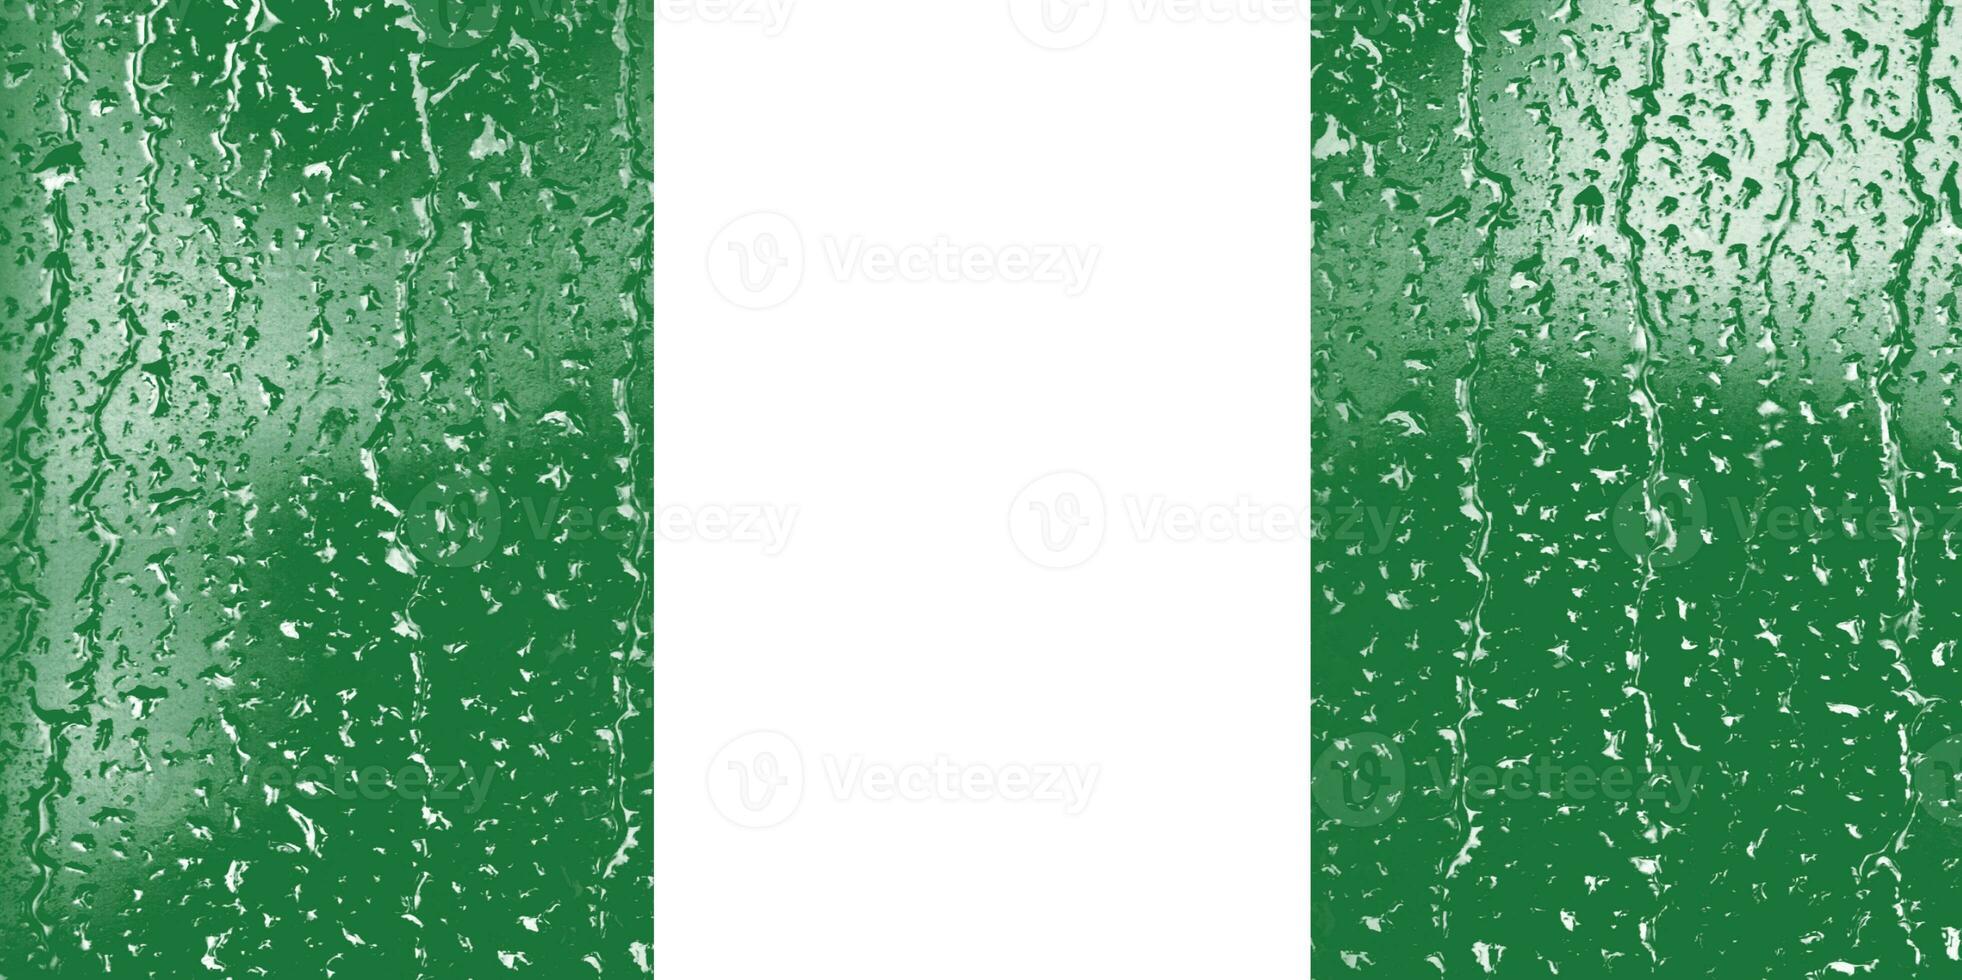 3D Flag of Nigeria on a glass with water drop background. photo